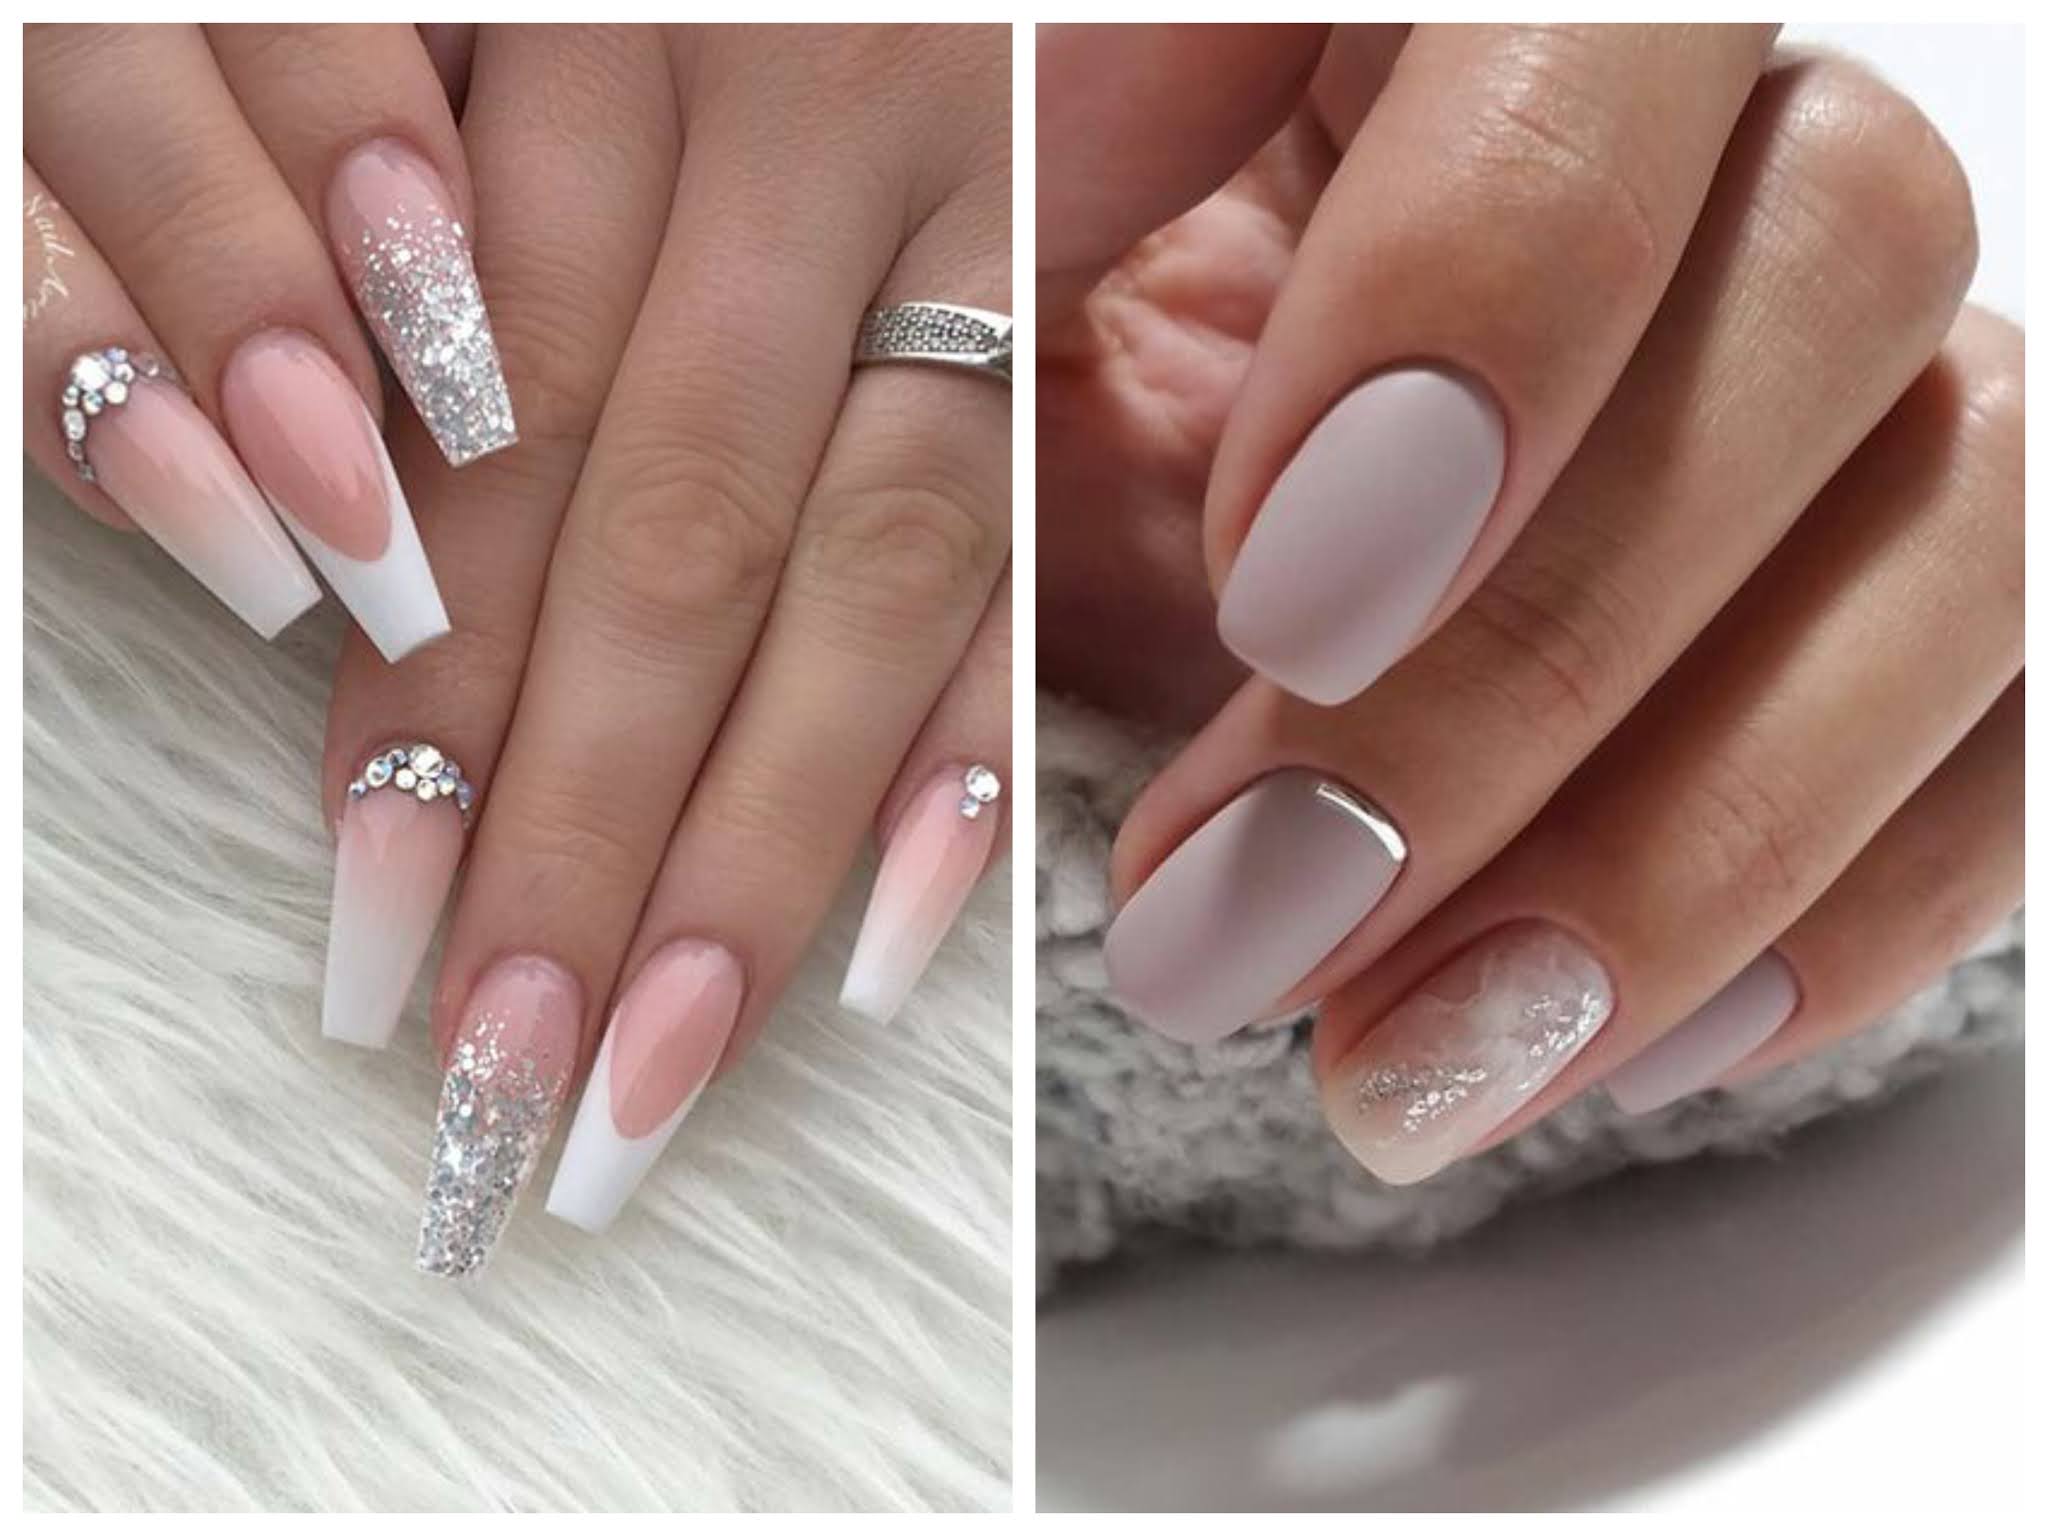 Elegant French Tip Coffin Nails You Need To See The Beauty Of Nail Arts